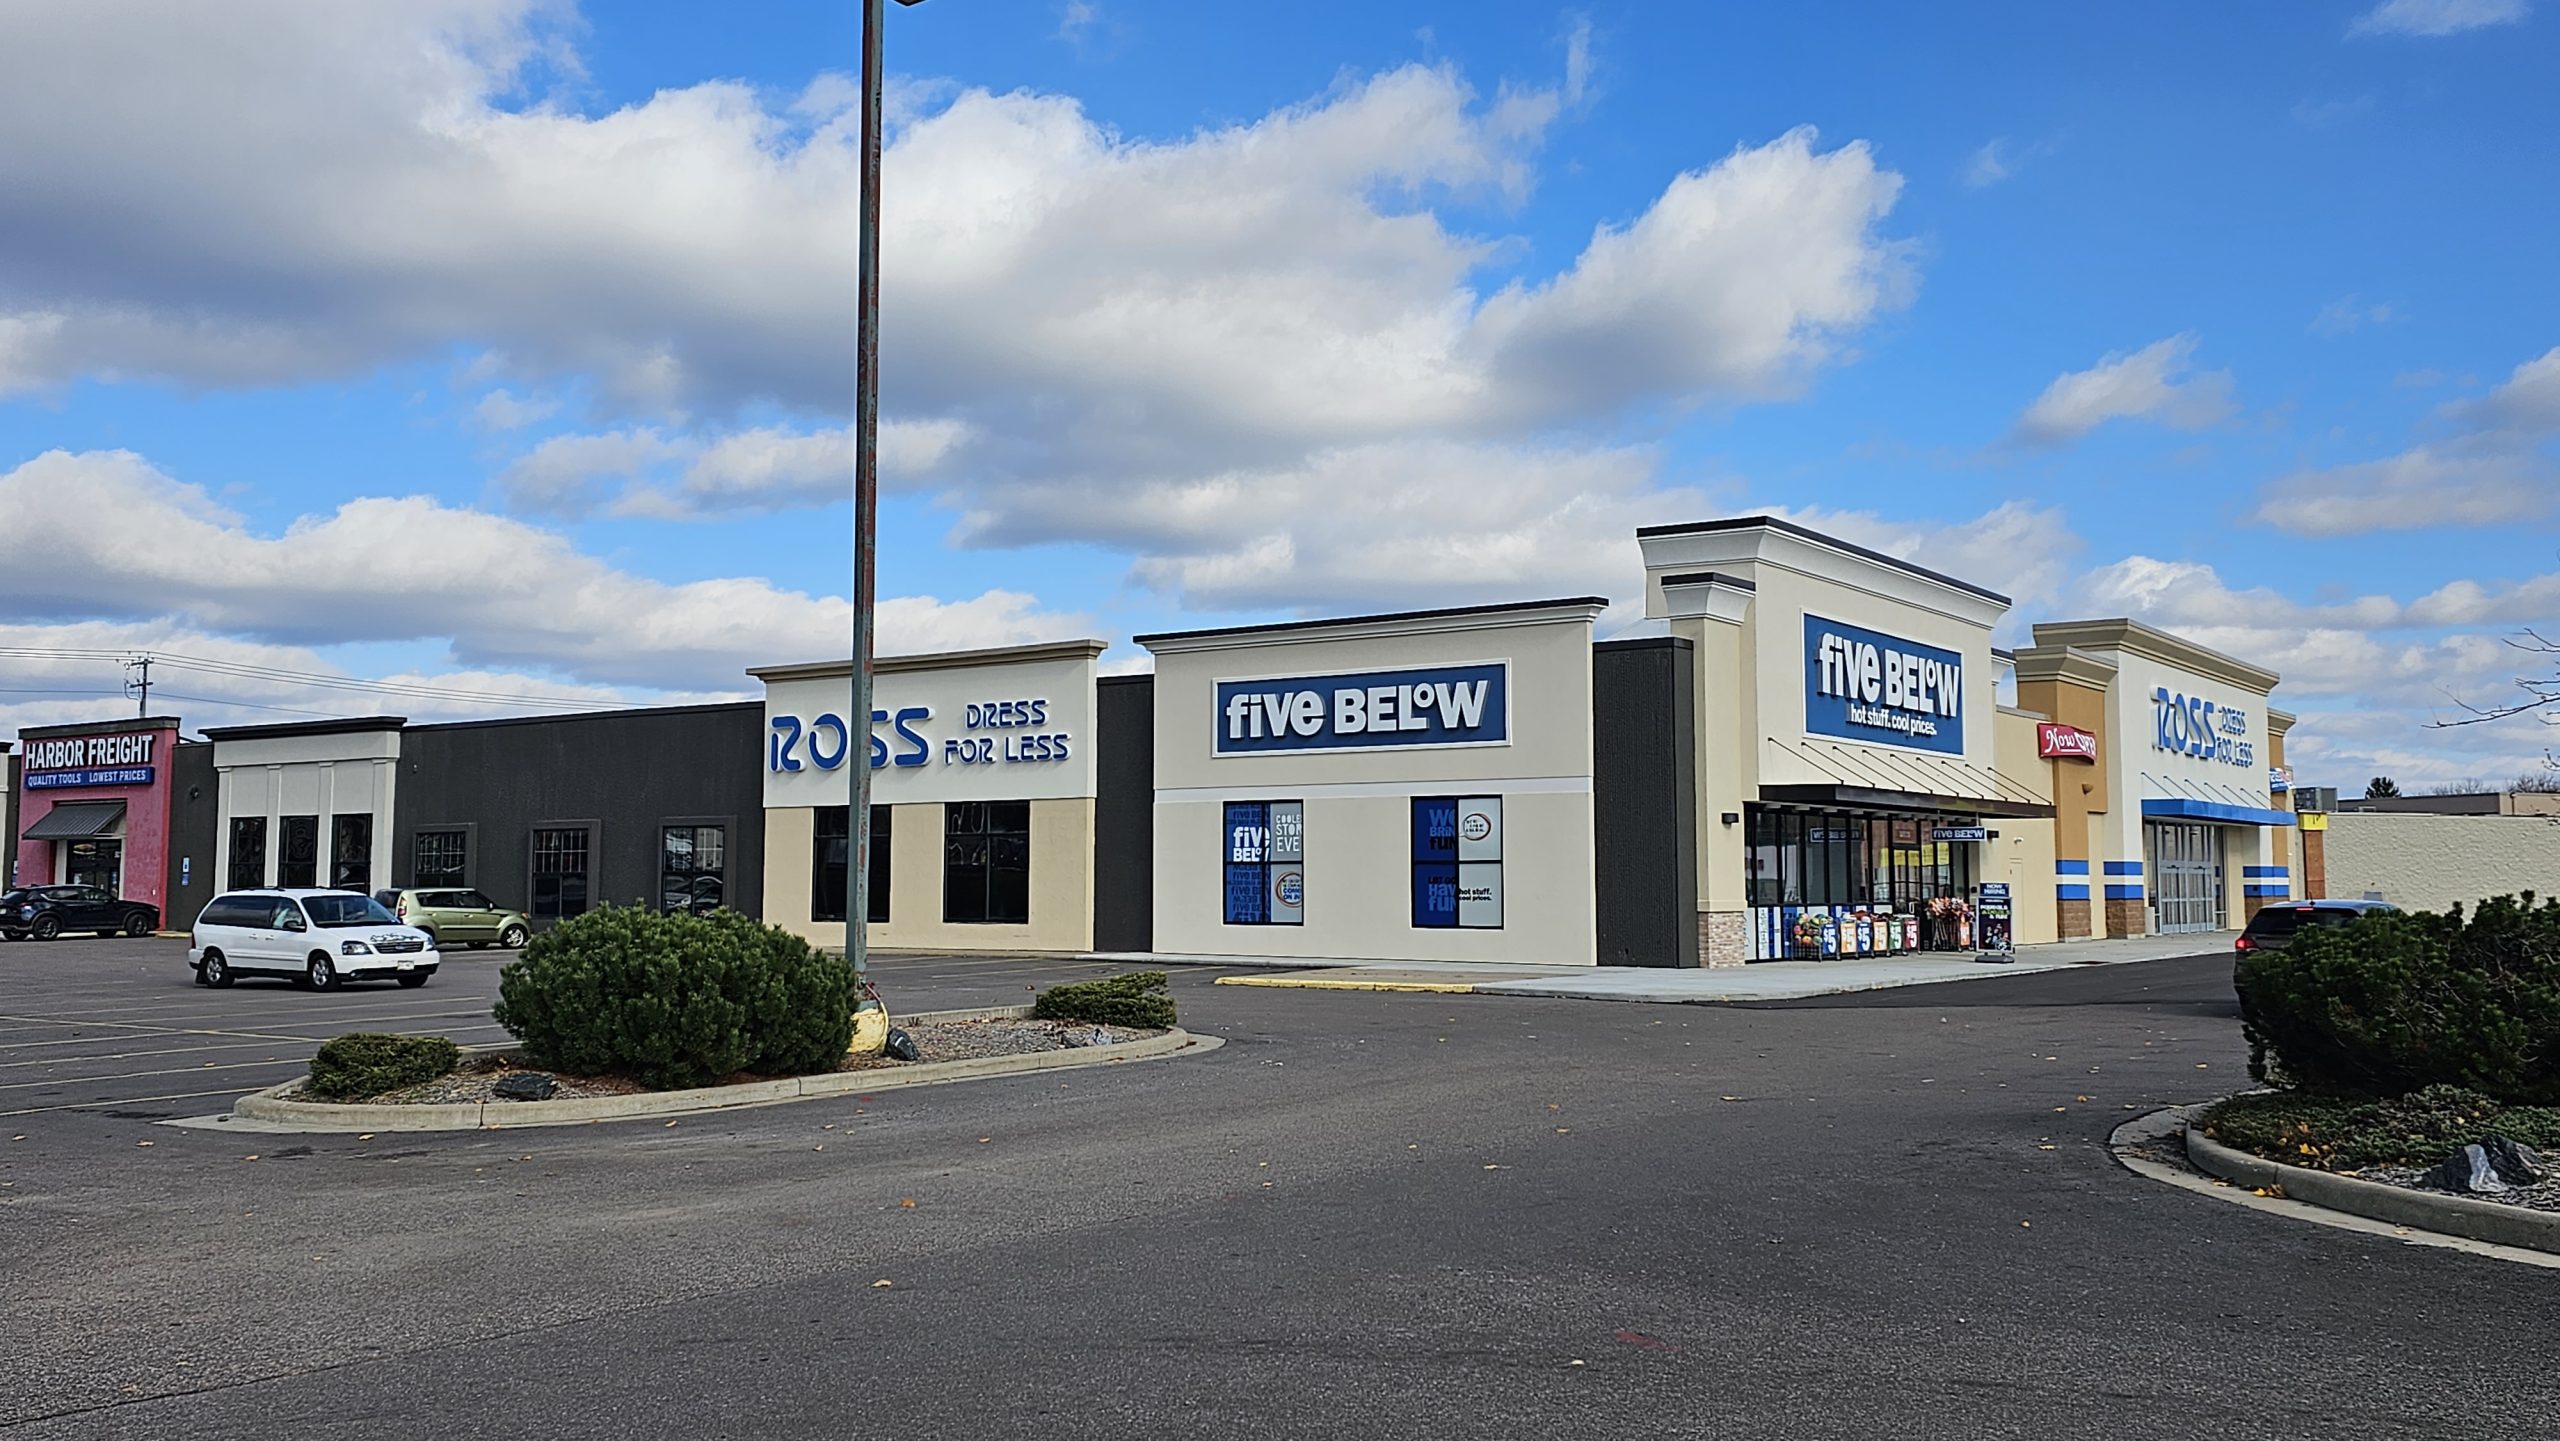 When will Ross Dress for Less open at the former Marshfield Mall?